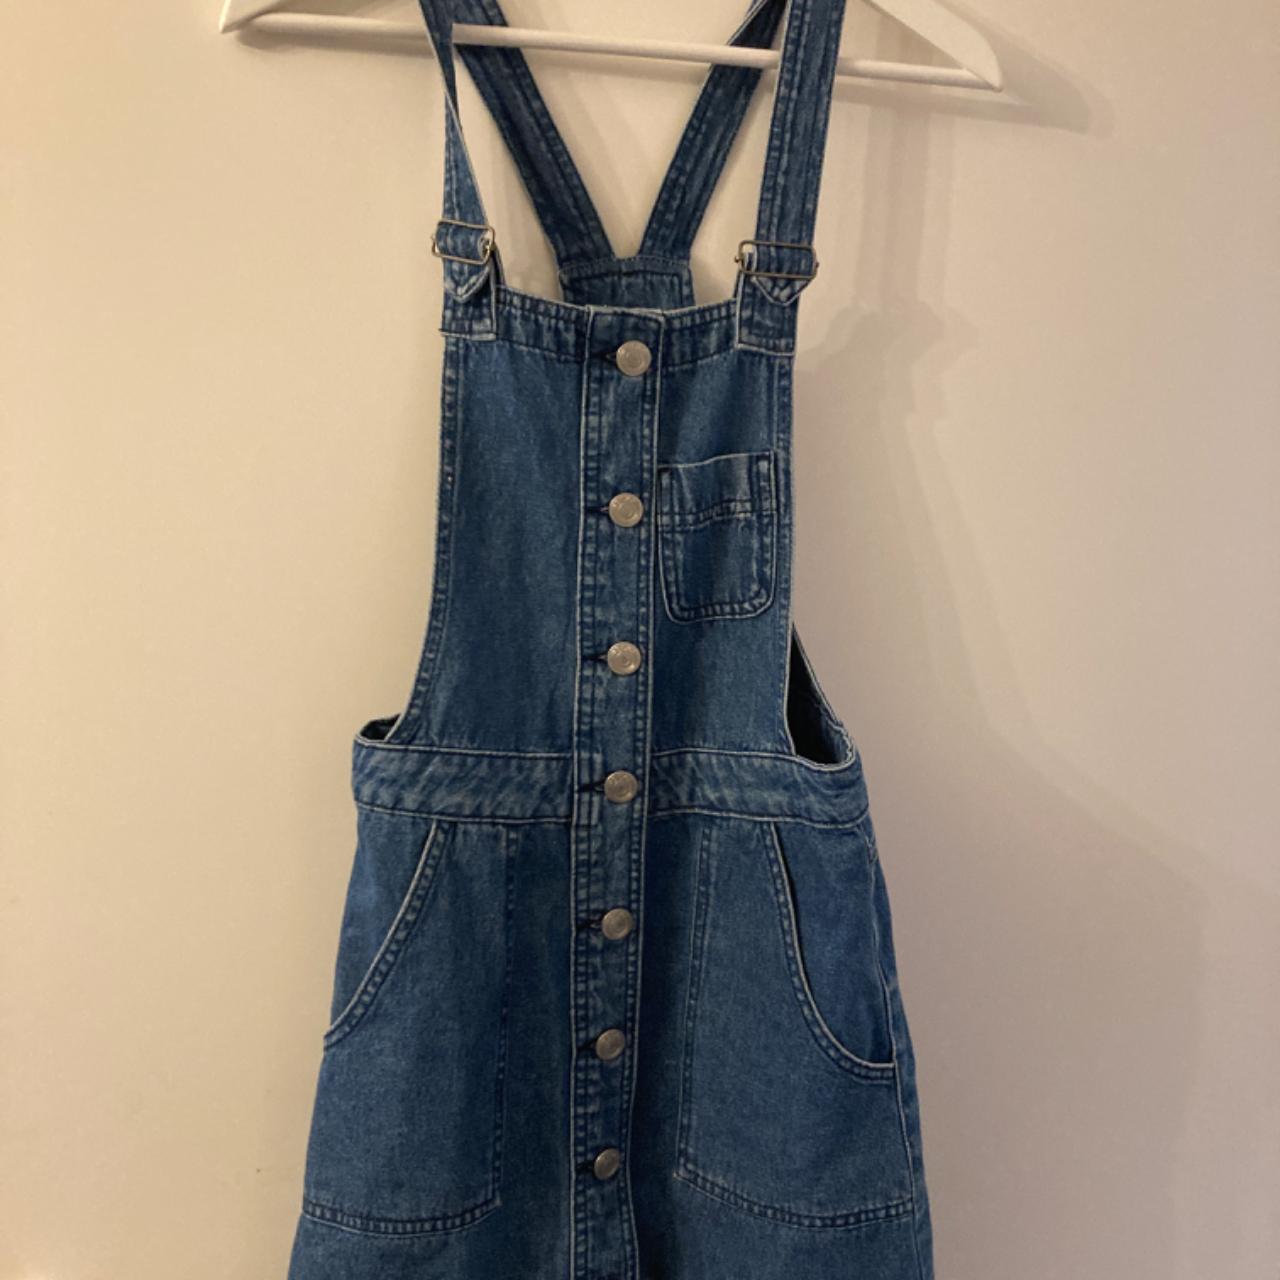 Noisy May Denim dungaree dress, Jeans. Fits a 6 or a... - Depop